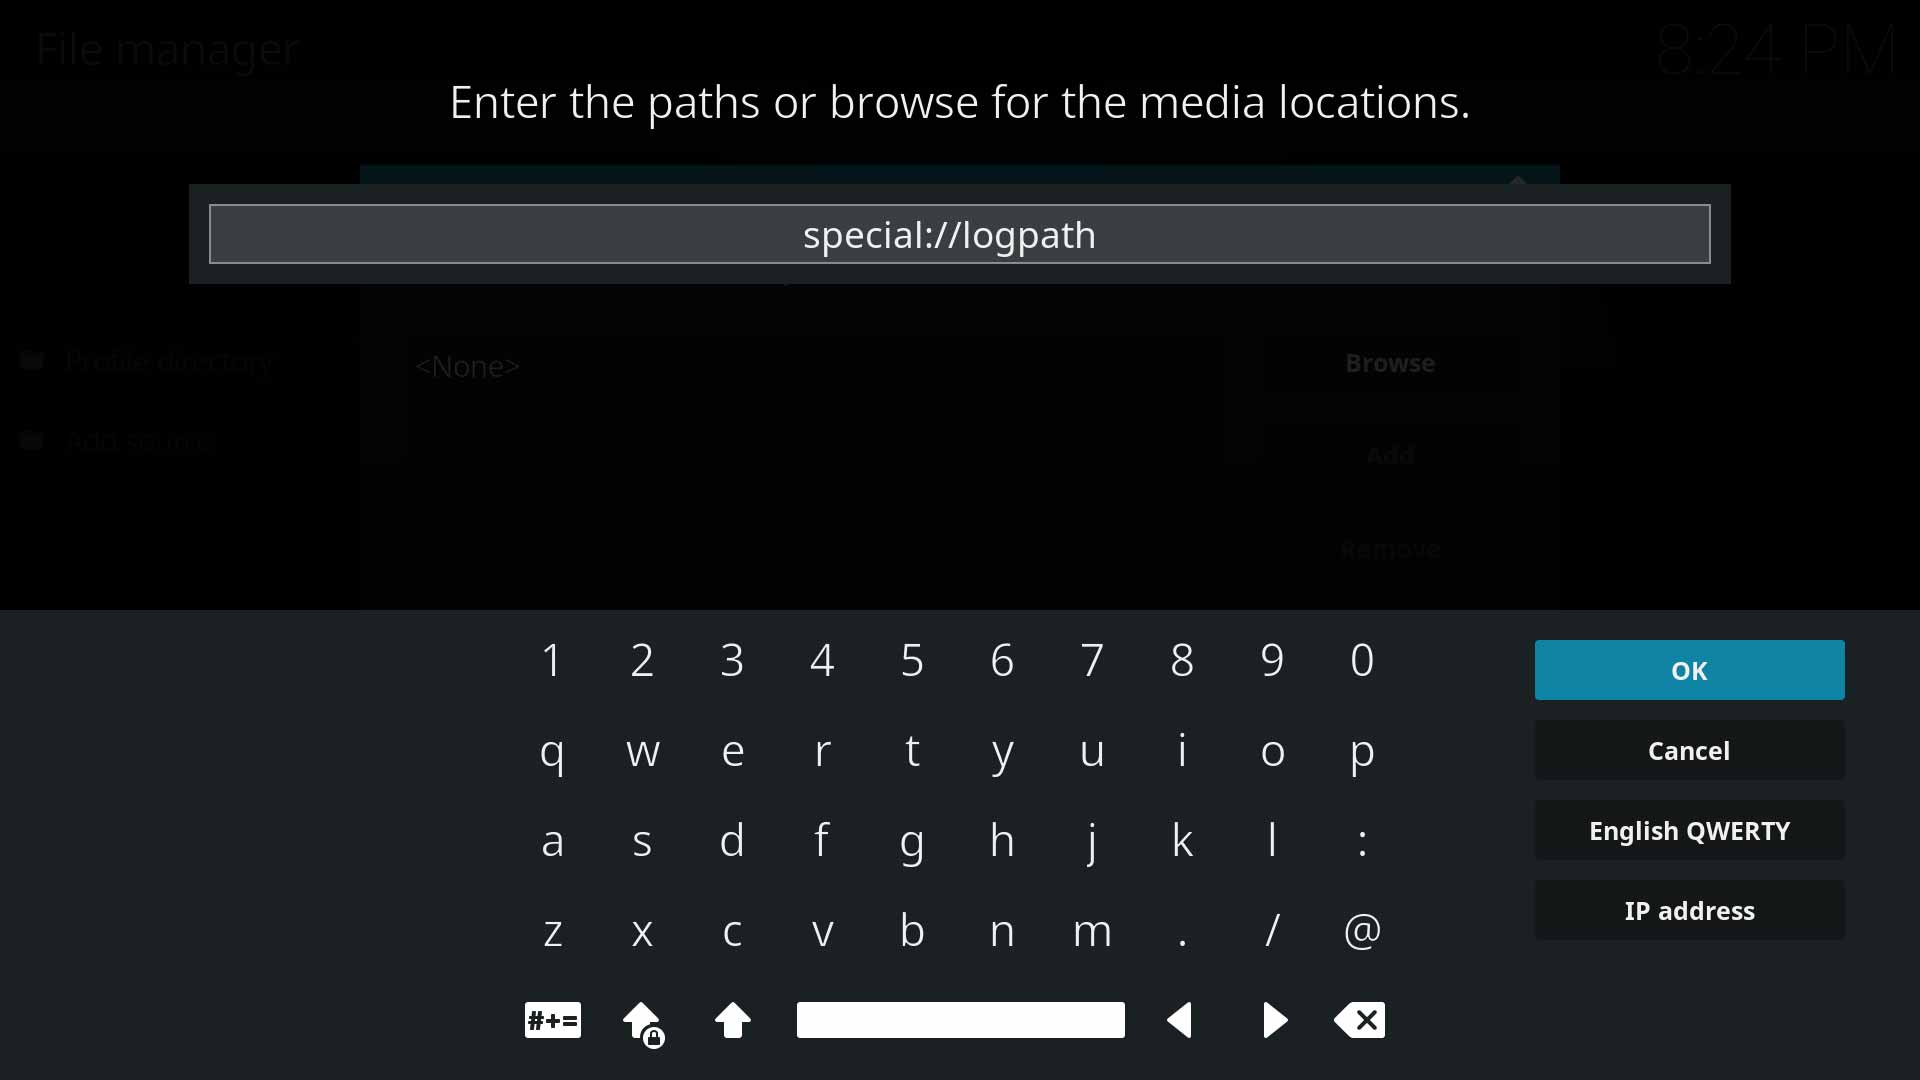 ↑ Step 4: Type in special://logpath and then press Ok.